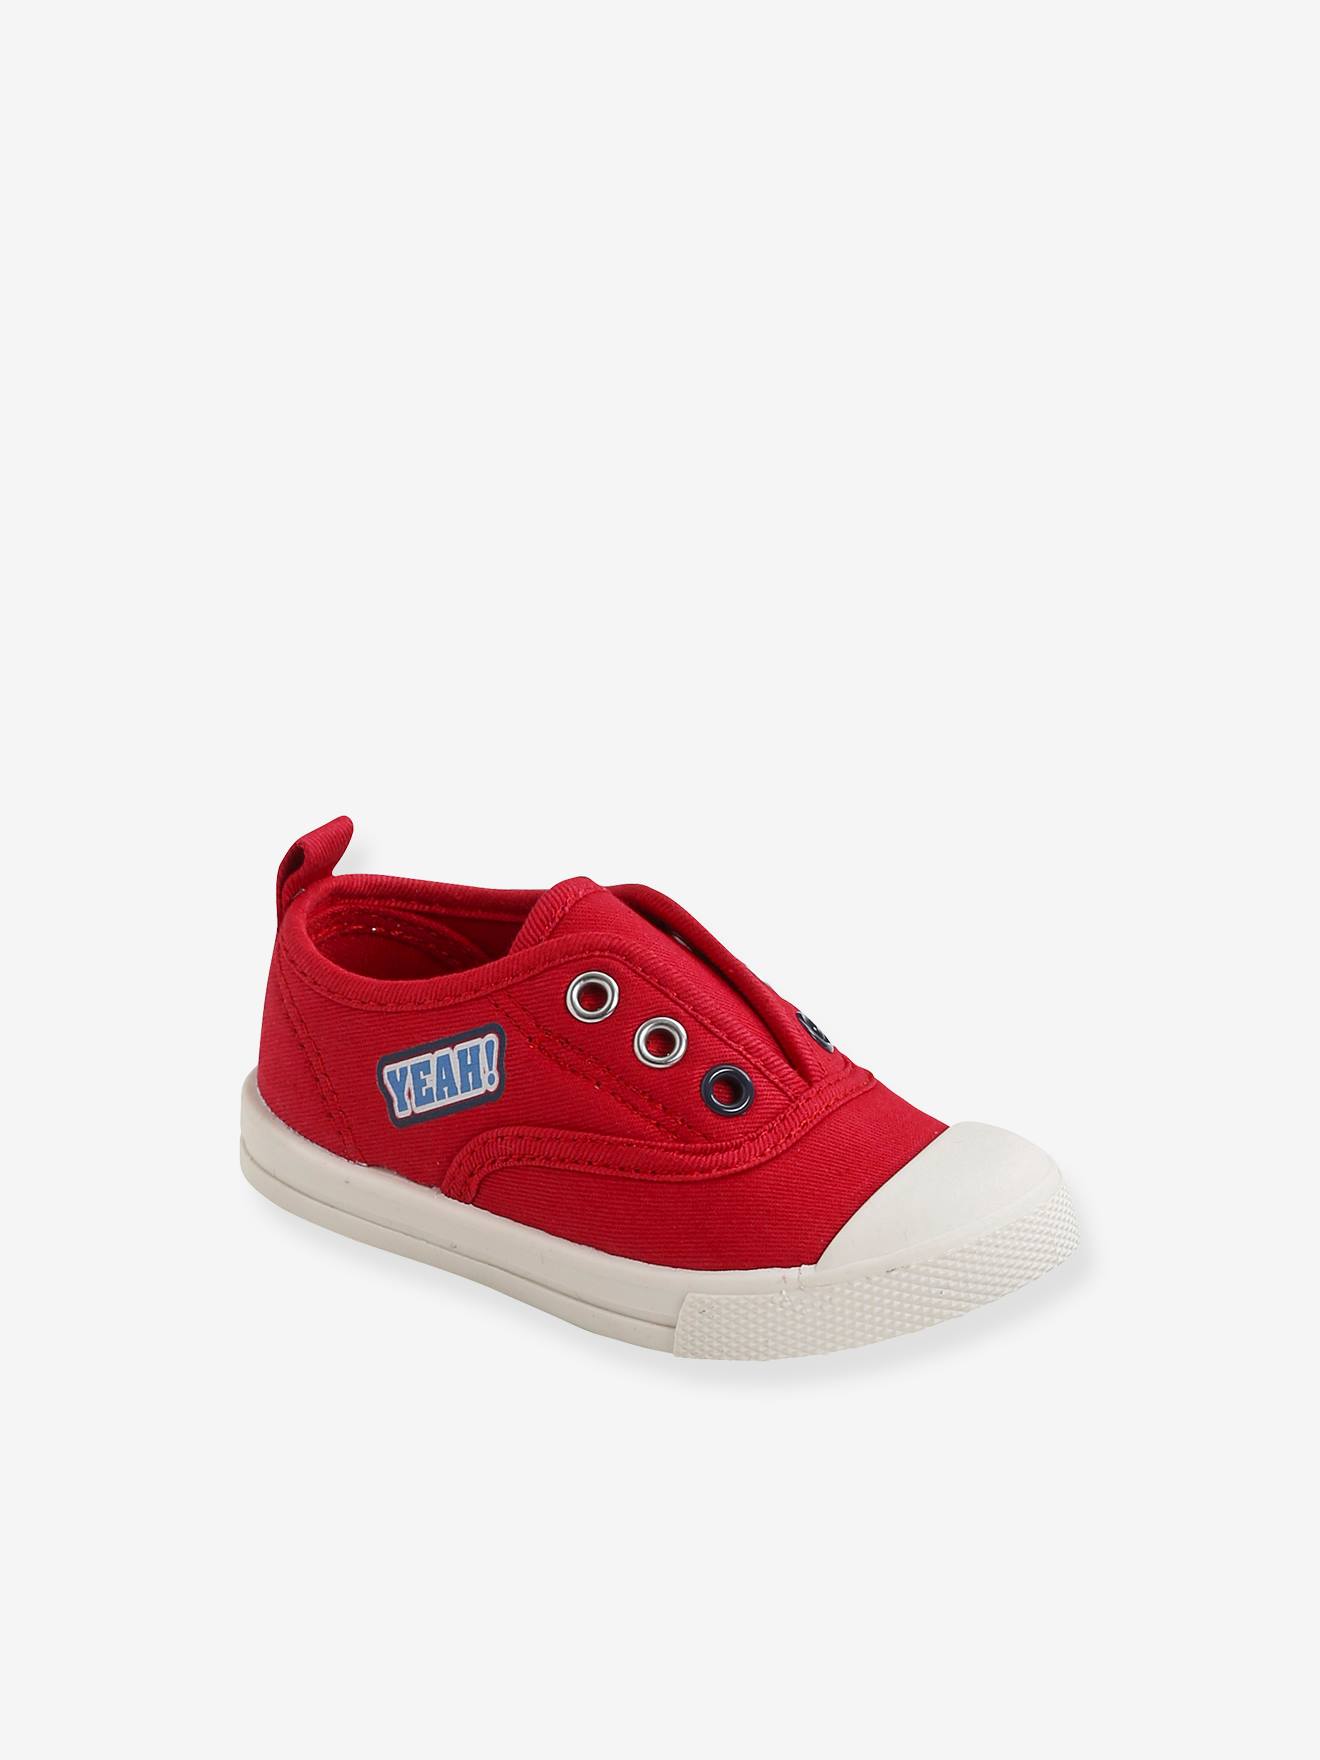 GRACE Toddler White Canvas Sneaker with Oversized Pink Bow